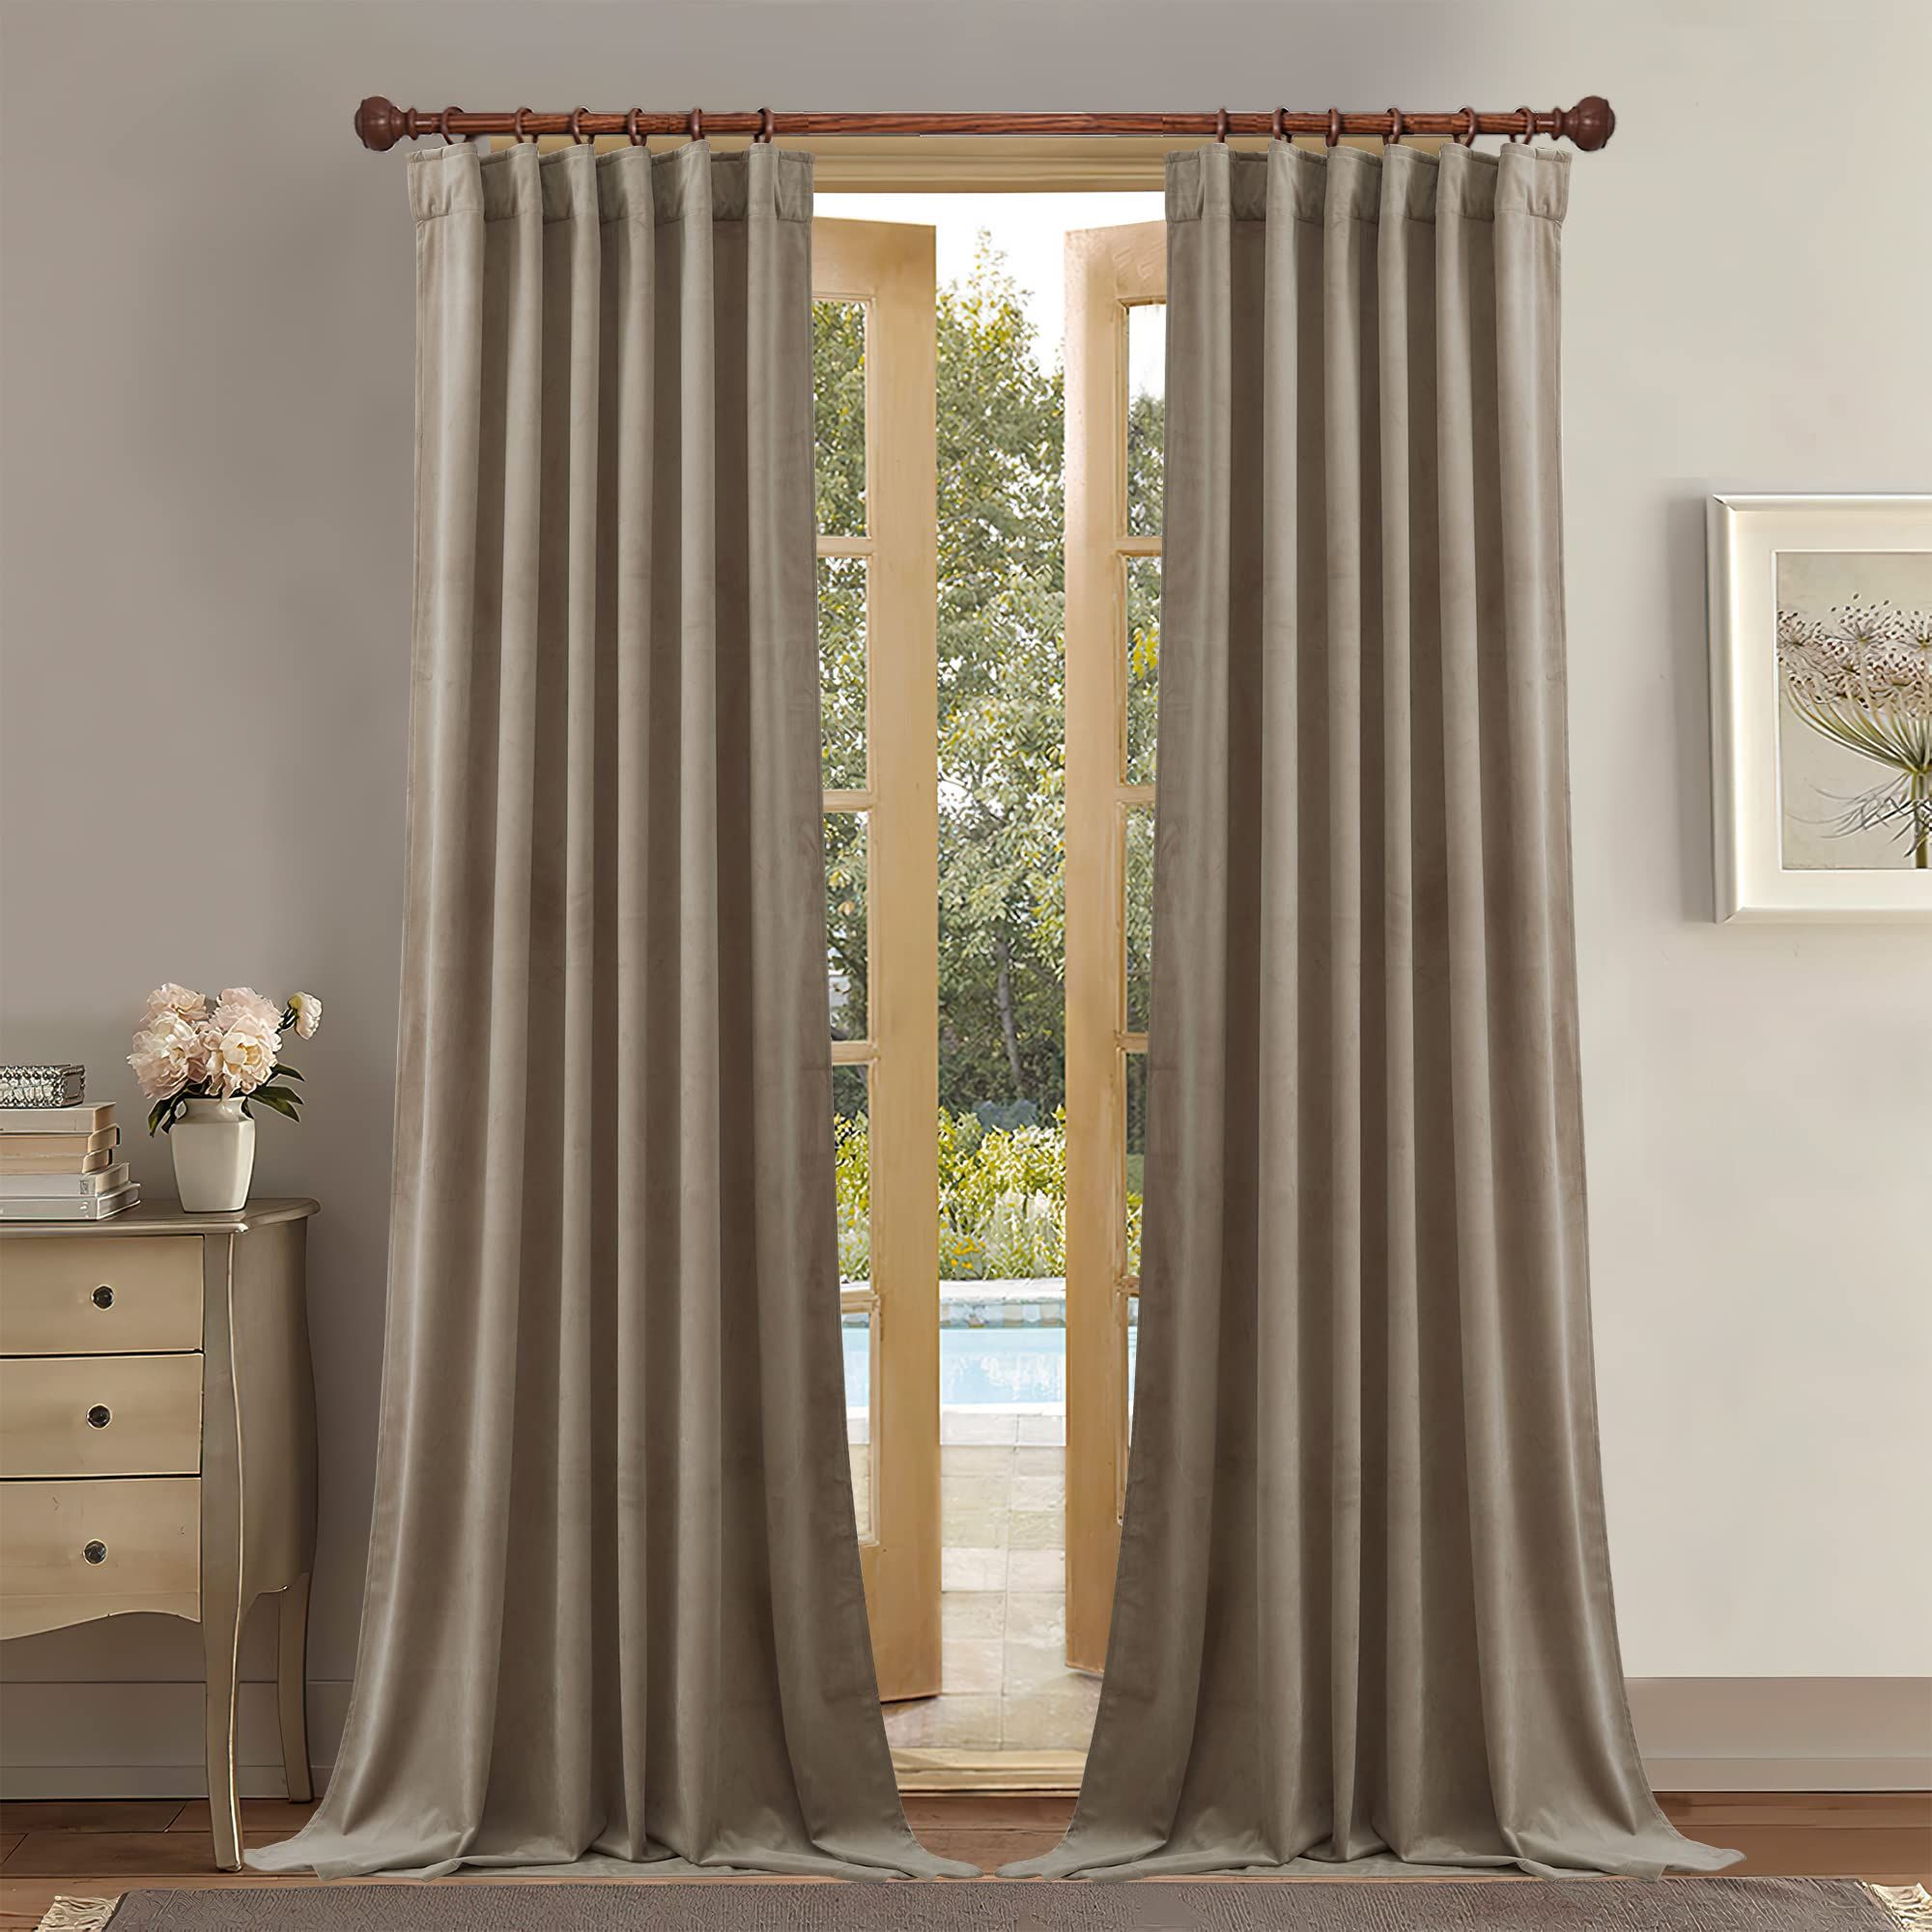 StangH Camel Beige Velvet Curtains 96 inches Long - Room Darkening Window Curtains for Kids Room,... | Amazon (US)